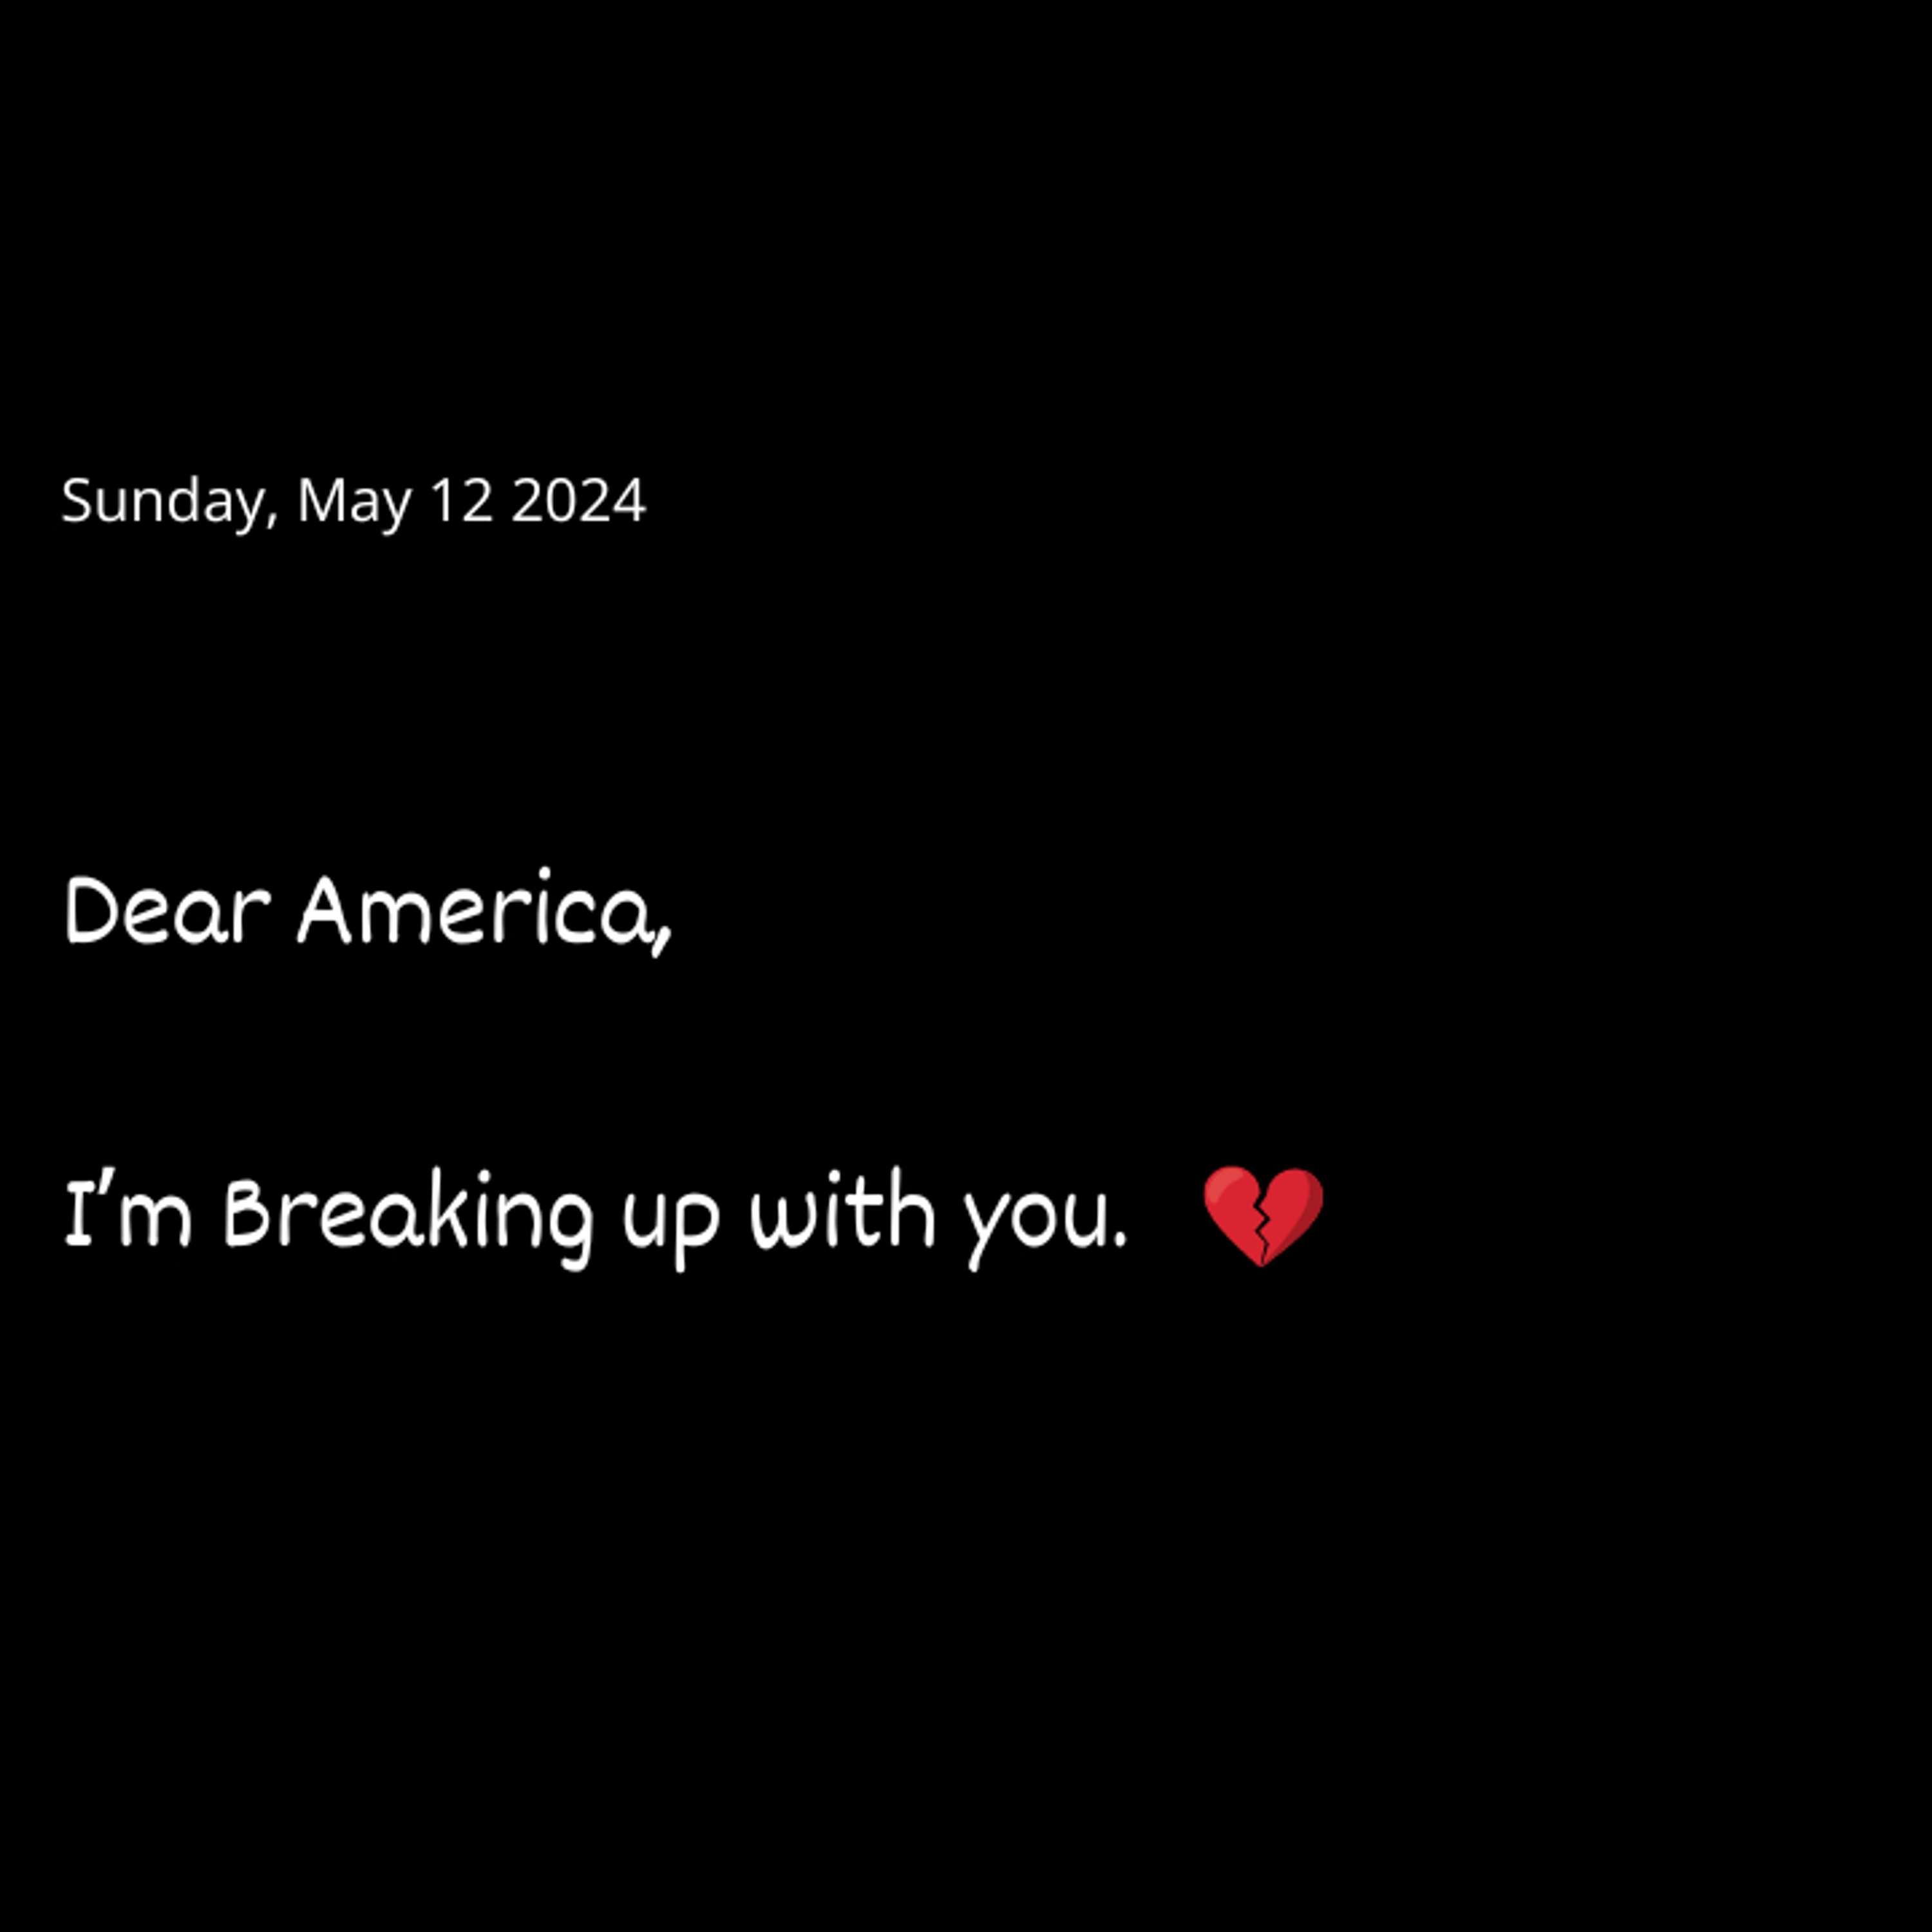 Dear America, I Am Breaking Up With You